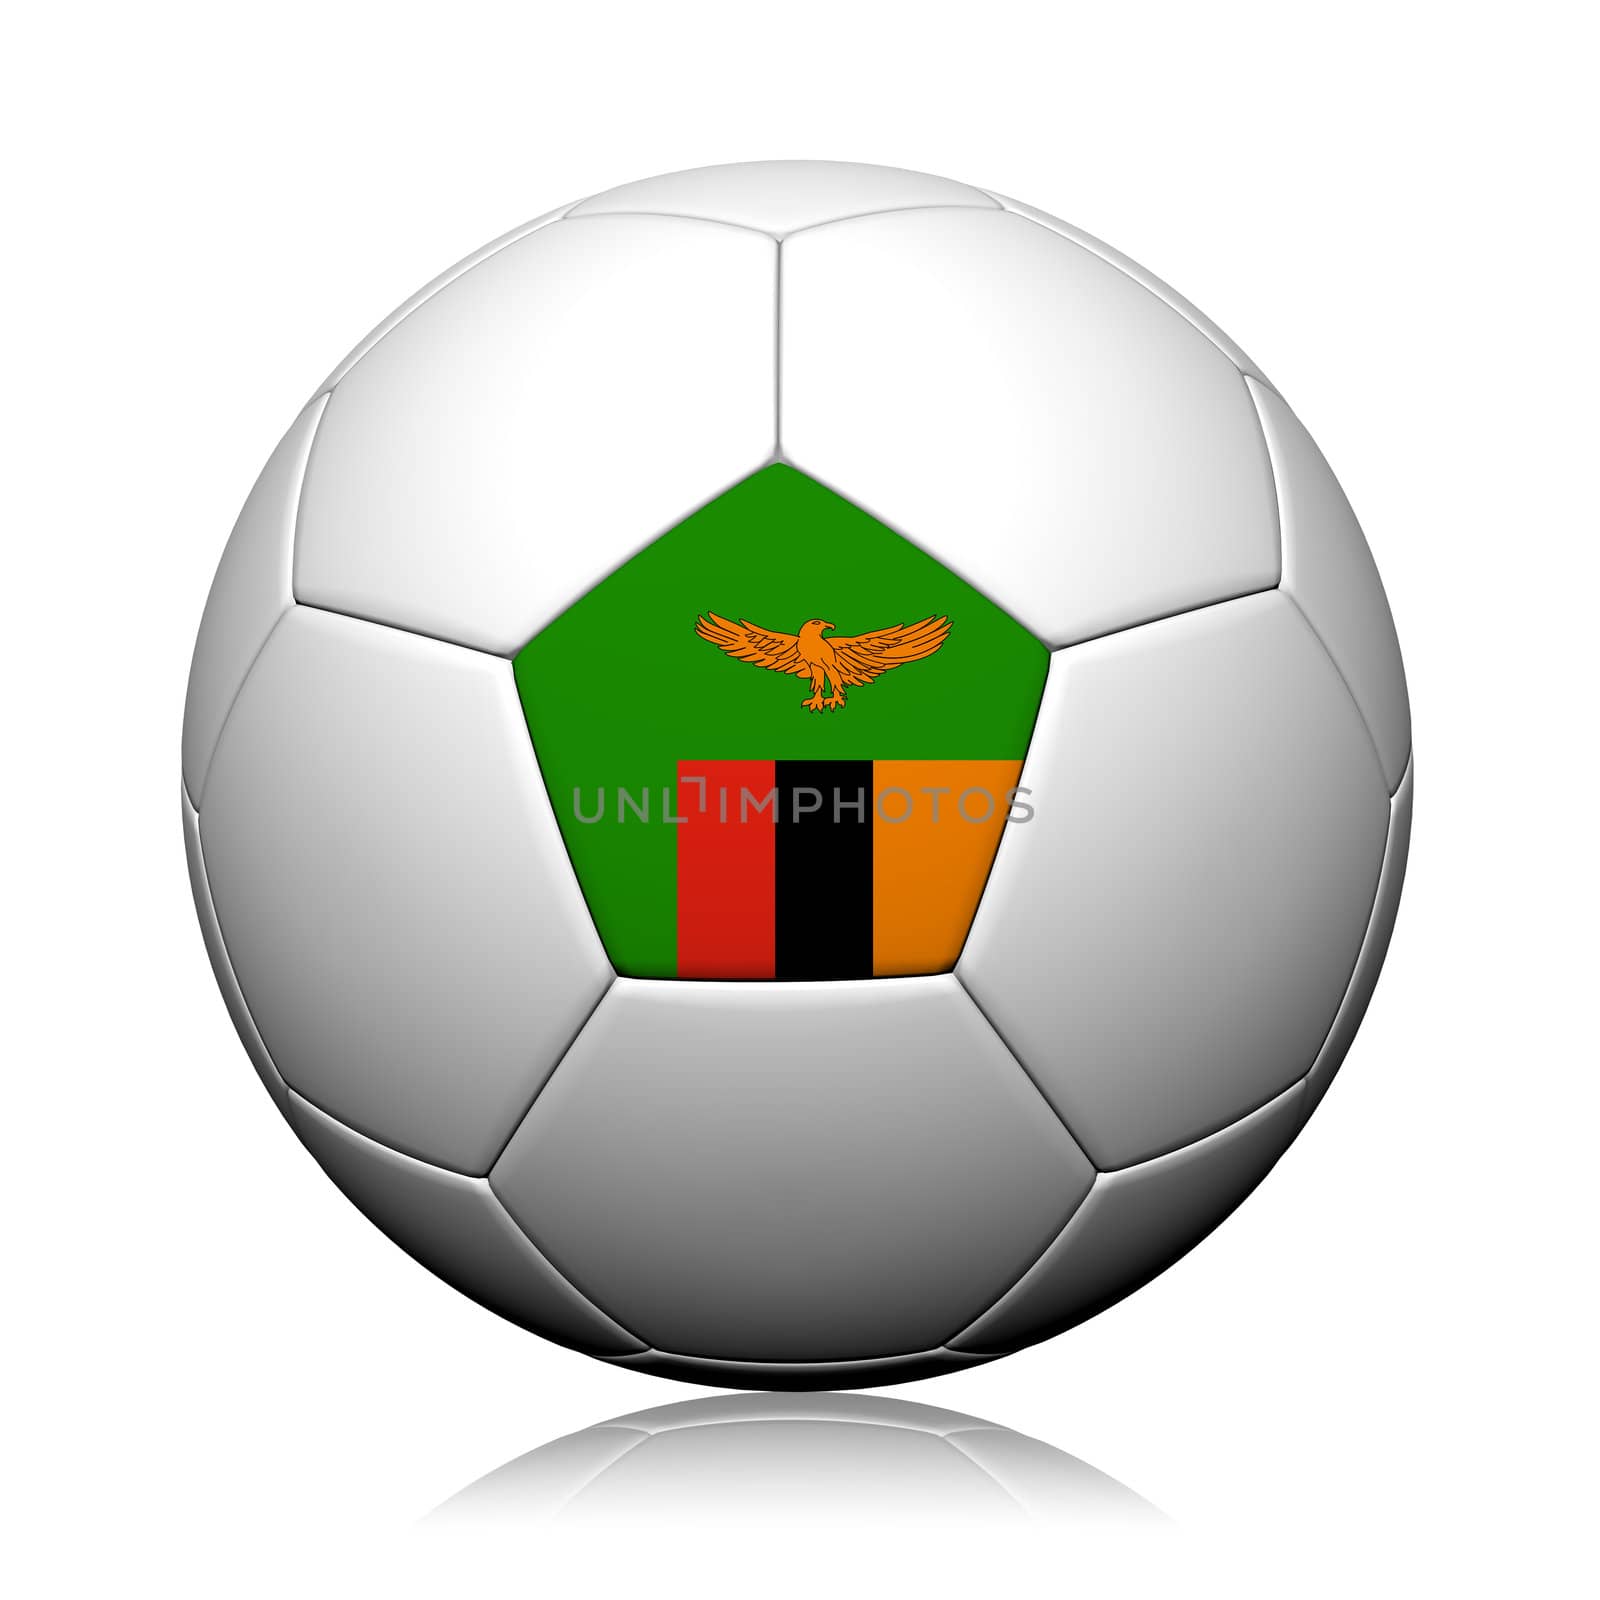 Zambia Flag Pattern 3d rendering of a soccer ball